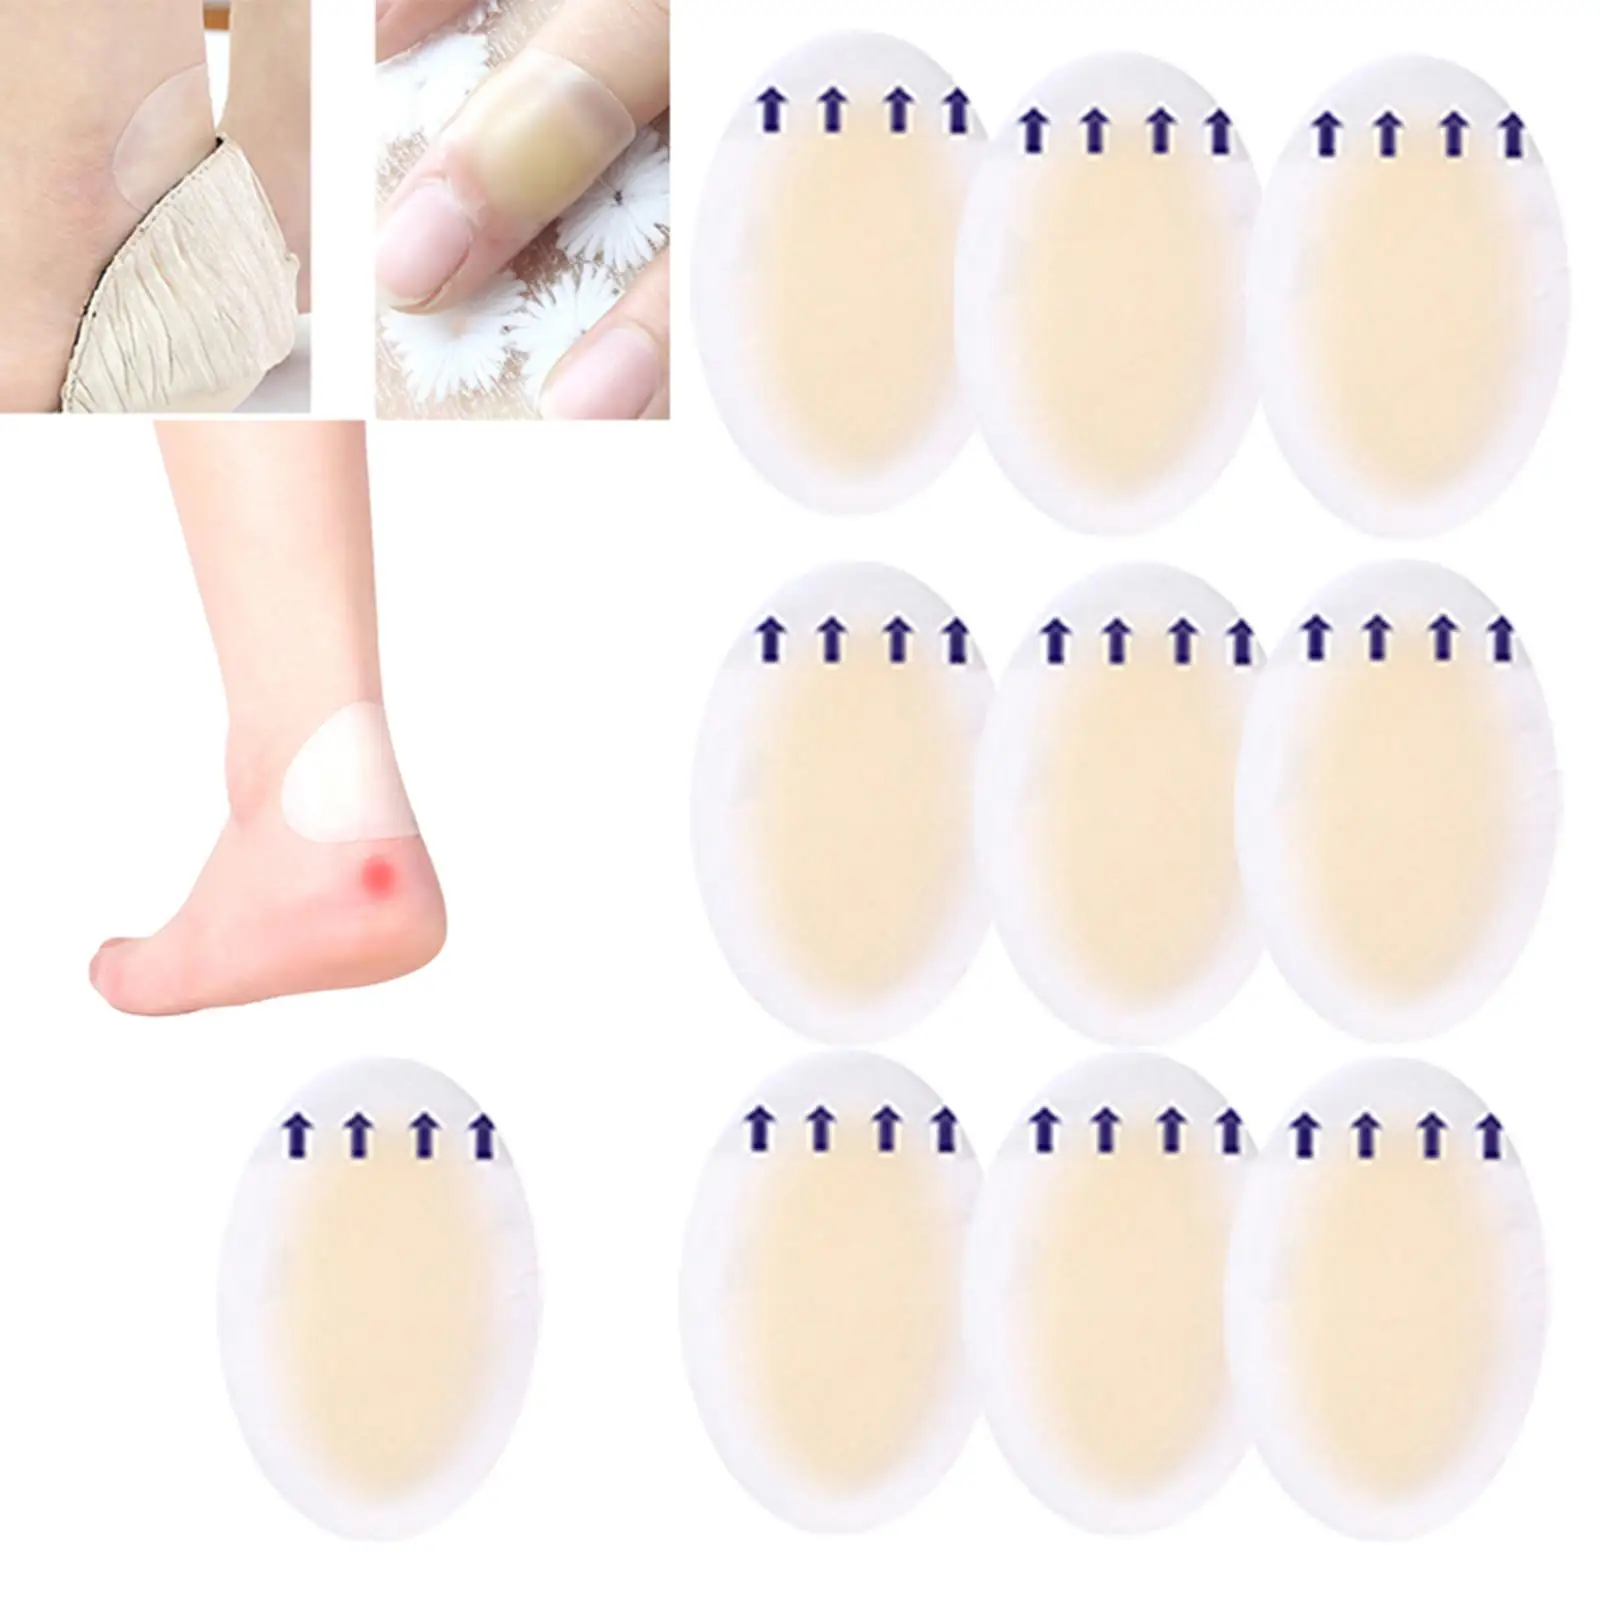 10x Gel Shoes Stickers, Protection Patch Self Adhesive Soft Hydrocolloid Pads, Shoe Heel Pad Heel Sticker